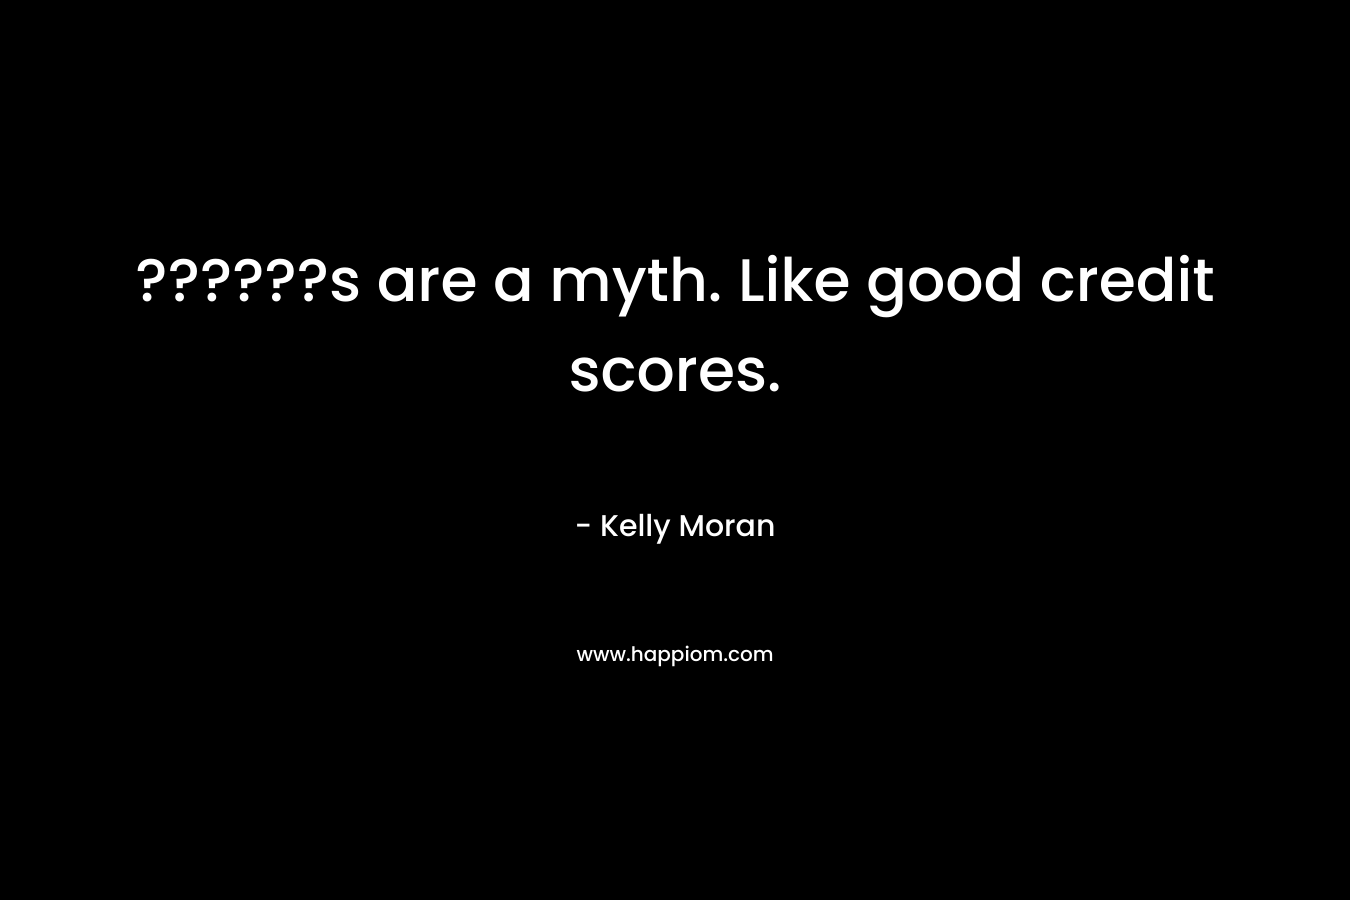 ??????s are a myth. Like good credit scores.